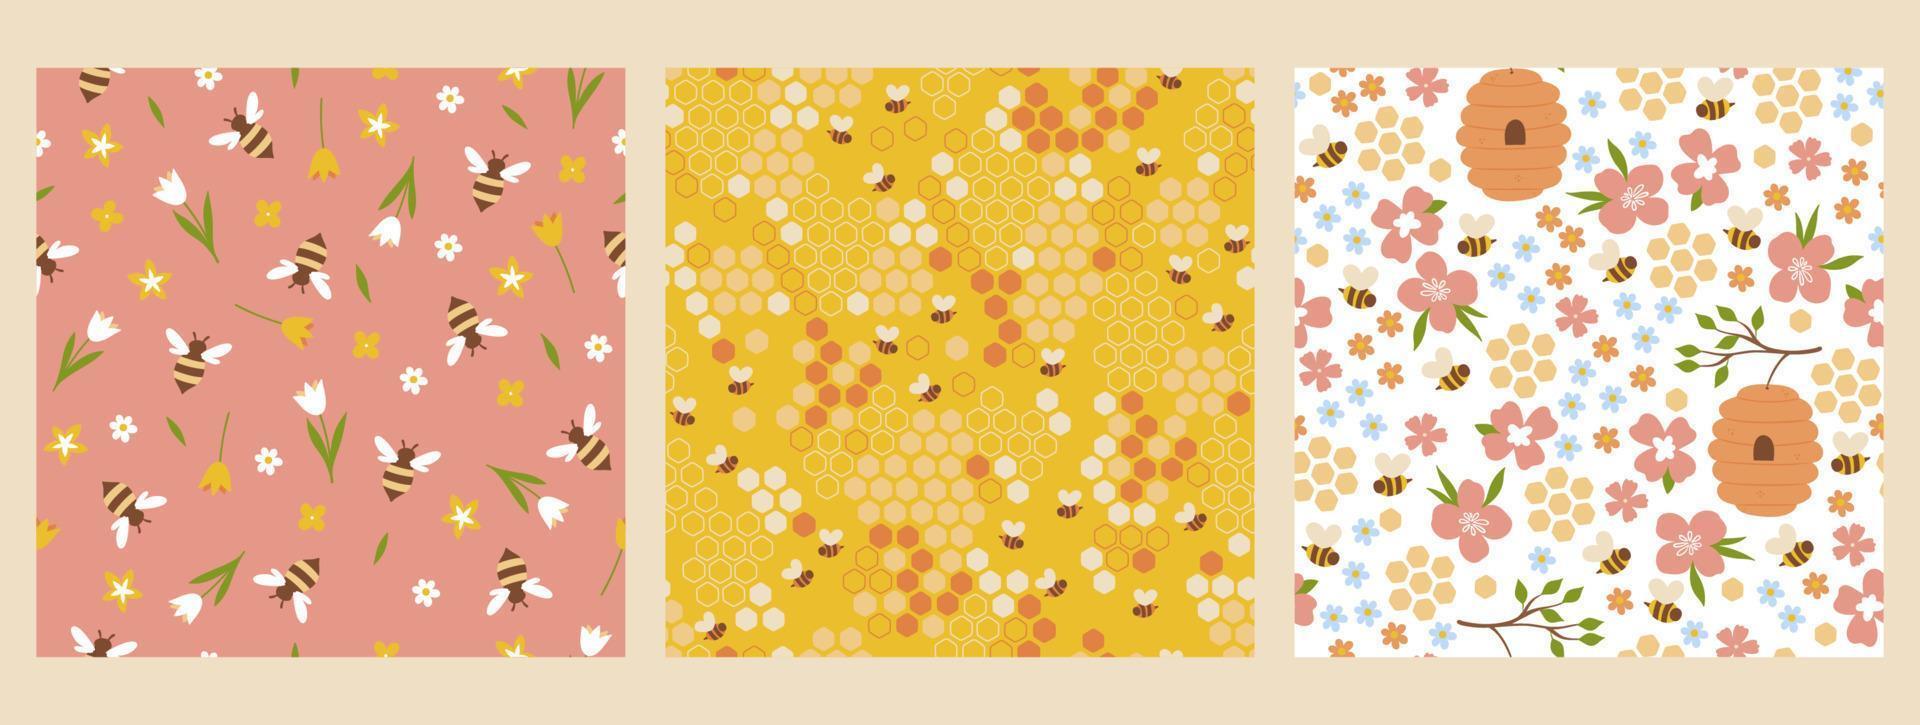 Set of seamless patterns with bees and flowers. Vector graphics.